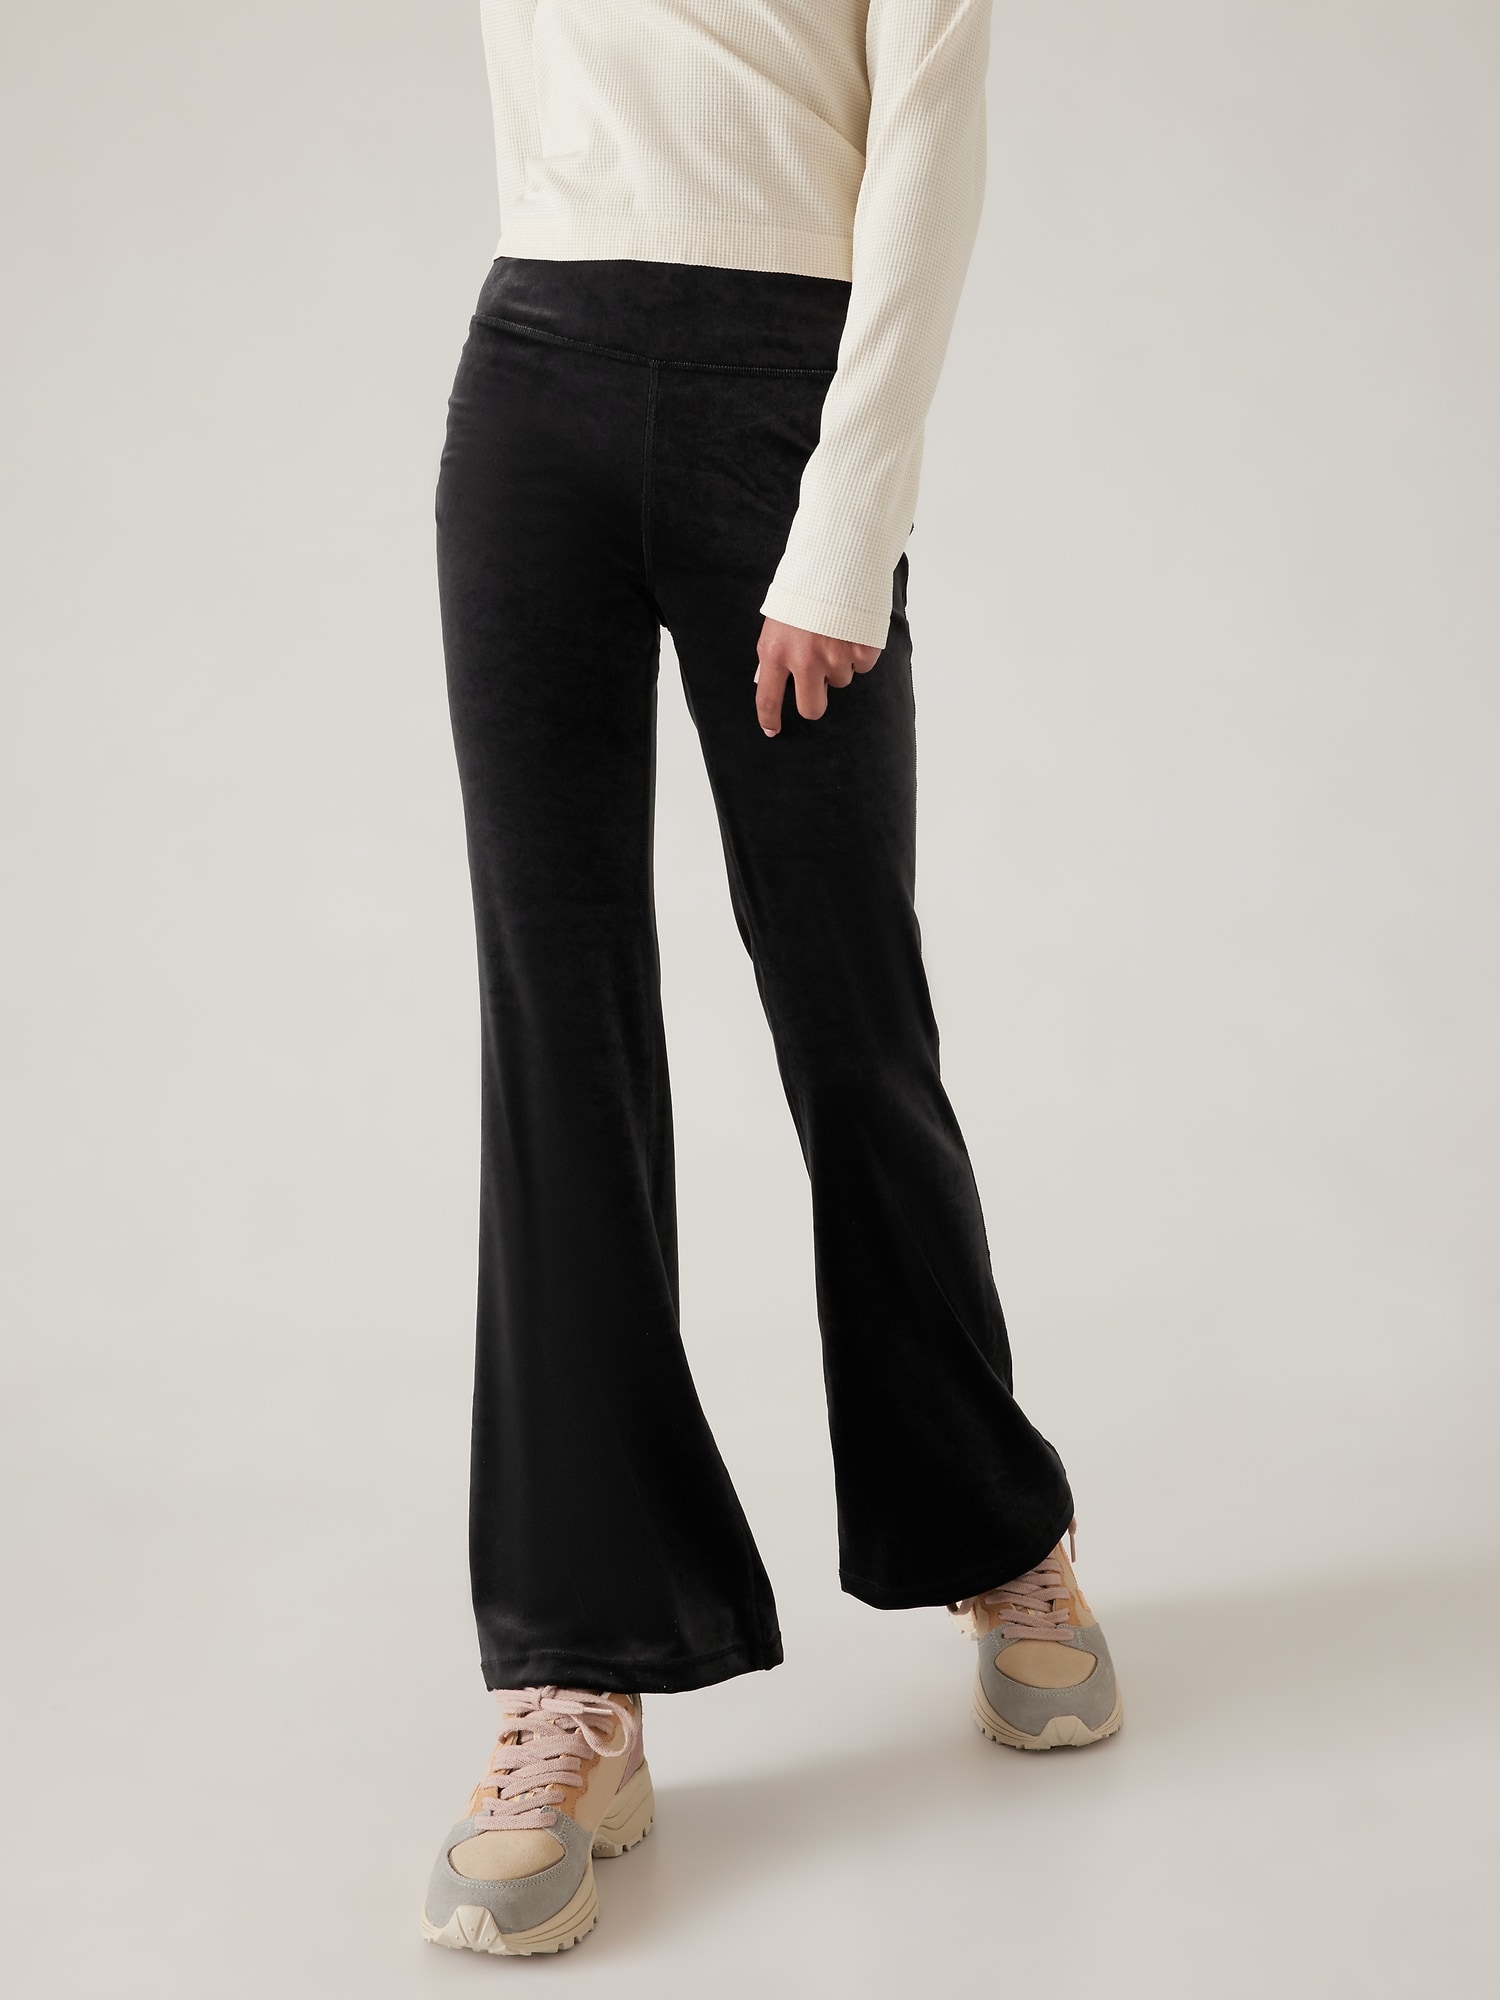 Athleta Girl High Rise Chit Chat Flare Pant